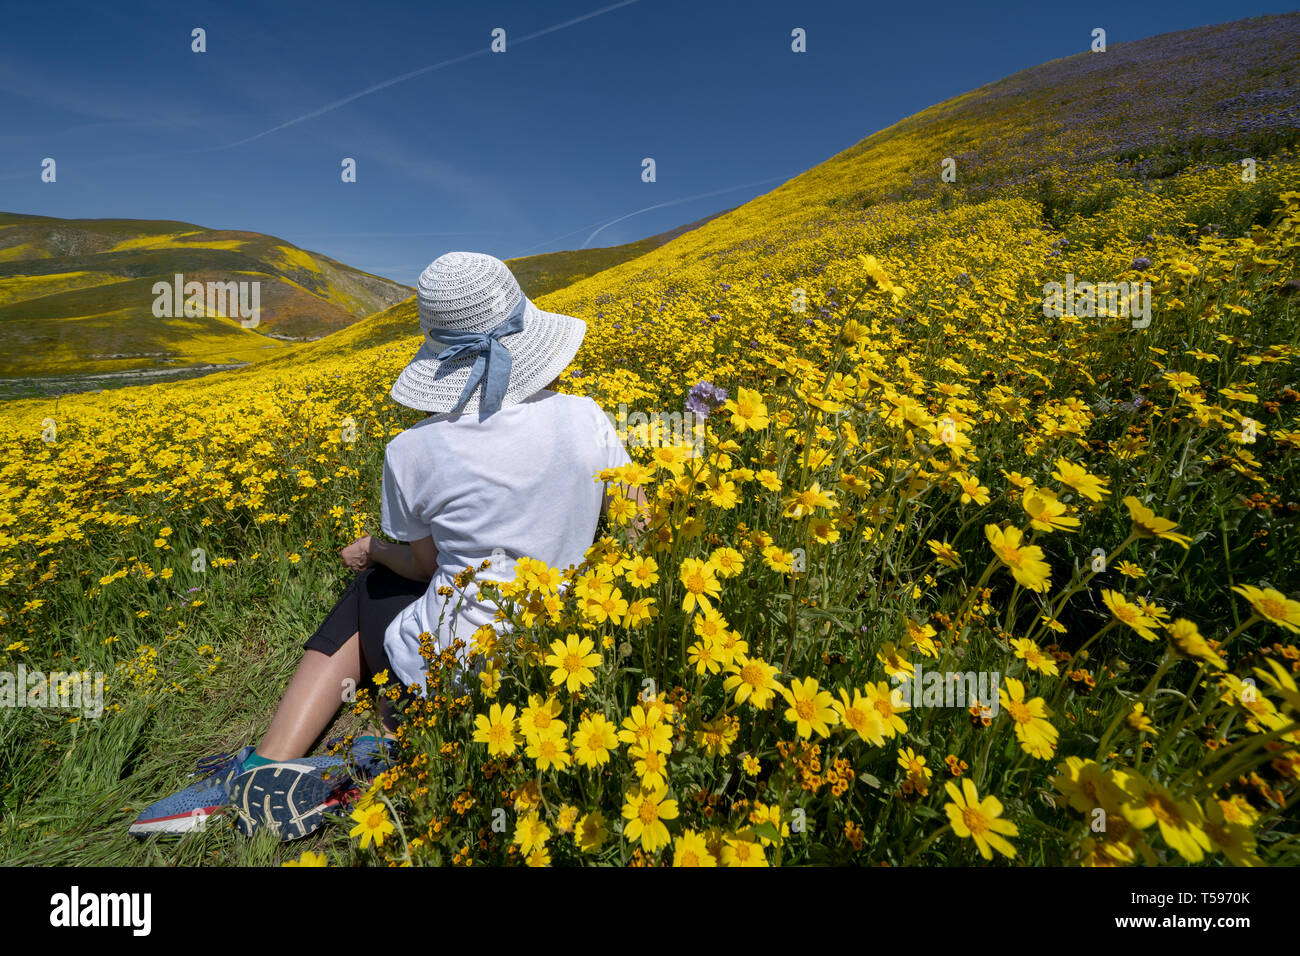 Beautiful woman with back facing camera, sitting in a field of yellow wildflowers. Concept for spring allergy season Stock Photo